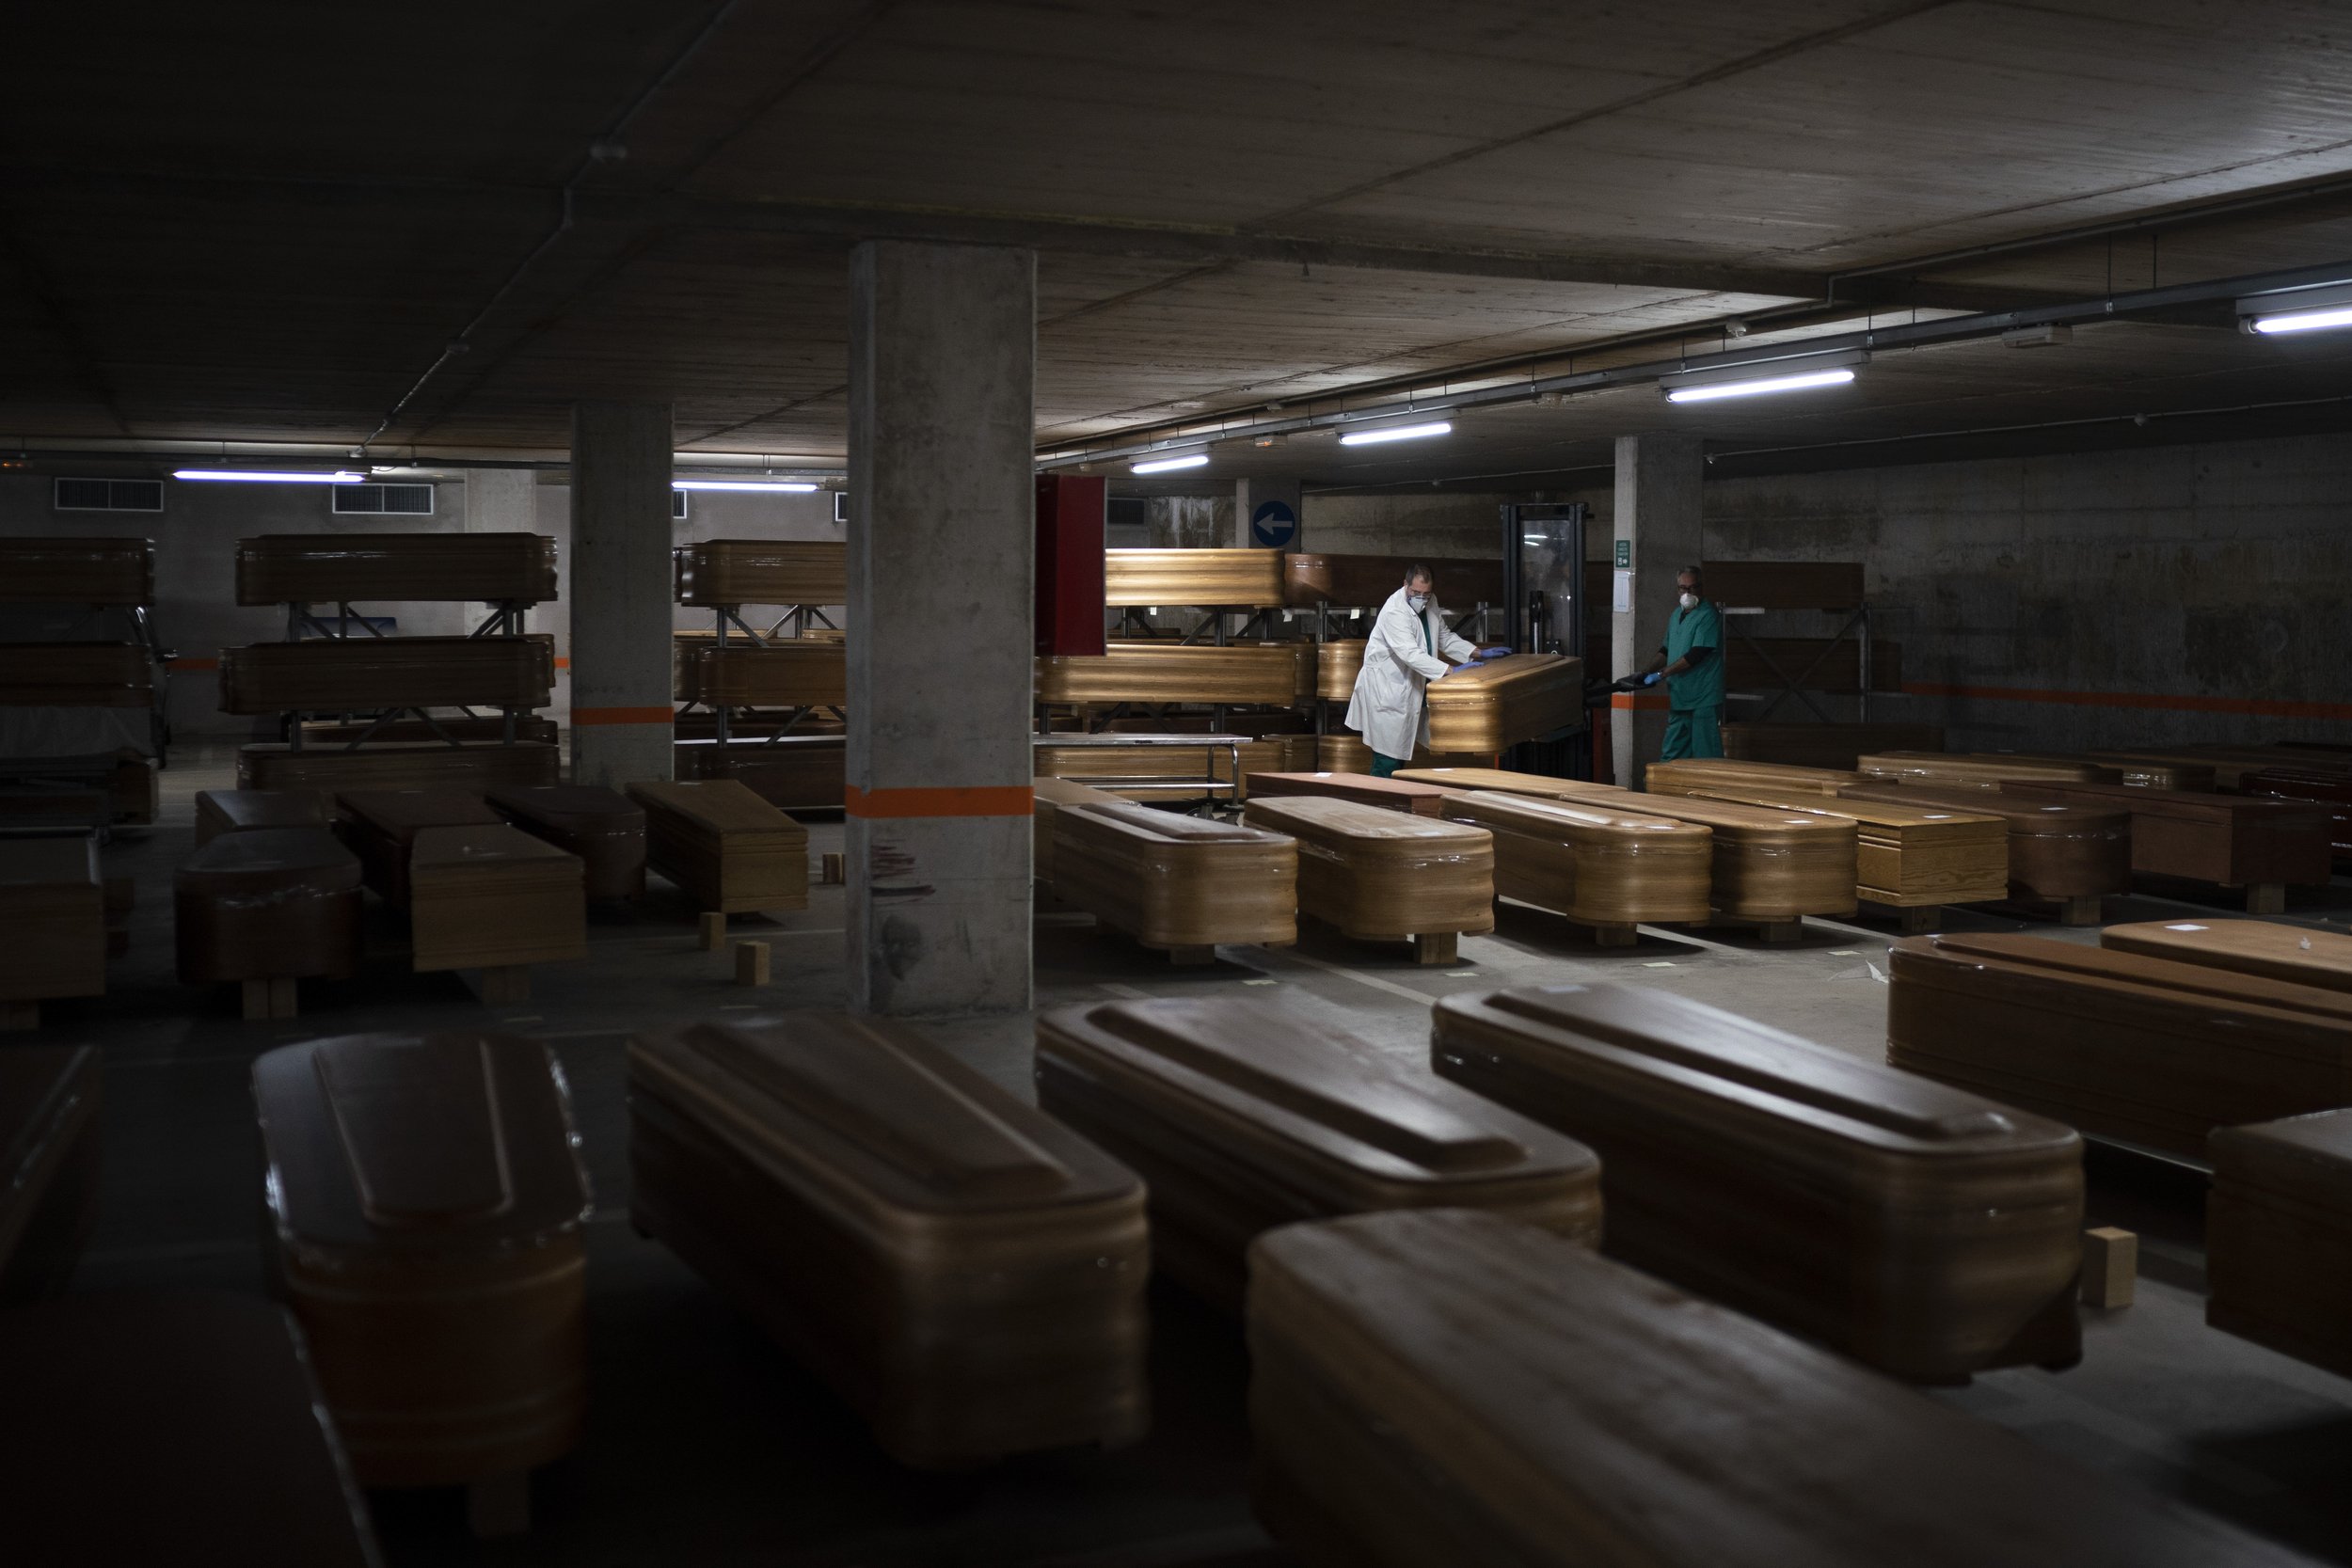  Coffins carrying the bodies of people who died of coronavirus and are stored waiting to be buried or incinerated in an underground parking lot at the Collserola funeral home in Barcelona, Spain, Thursday, April 2, 2020. (AP Photo/Felipe Dana) 